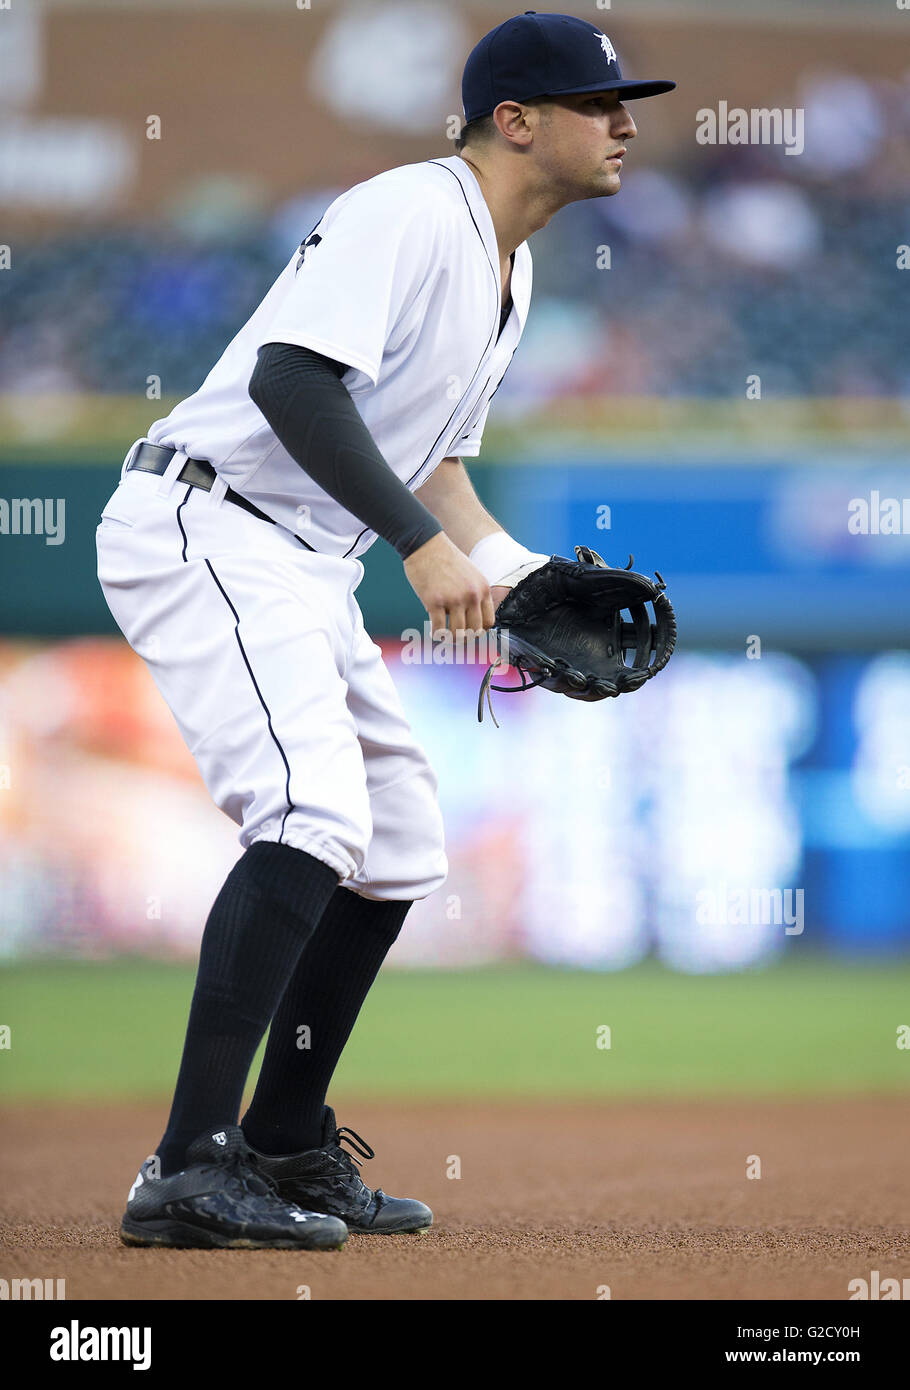 Detroit, Michigan, USA. 24th May, 2016. Detroit Tigers third baseman Nick Castellanos (9) in fielding position during MLB game action between the Philadelphia Phillies and the Detroit Tigers at Comerica Park in Detroit, Michigan. The Tigers defeated the Phillies 3-1. John Mersits/CSM/Alamy Live News Stock Photo